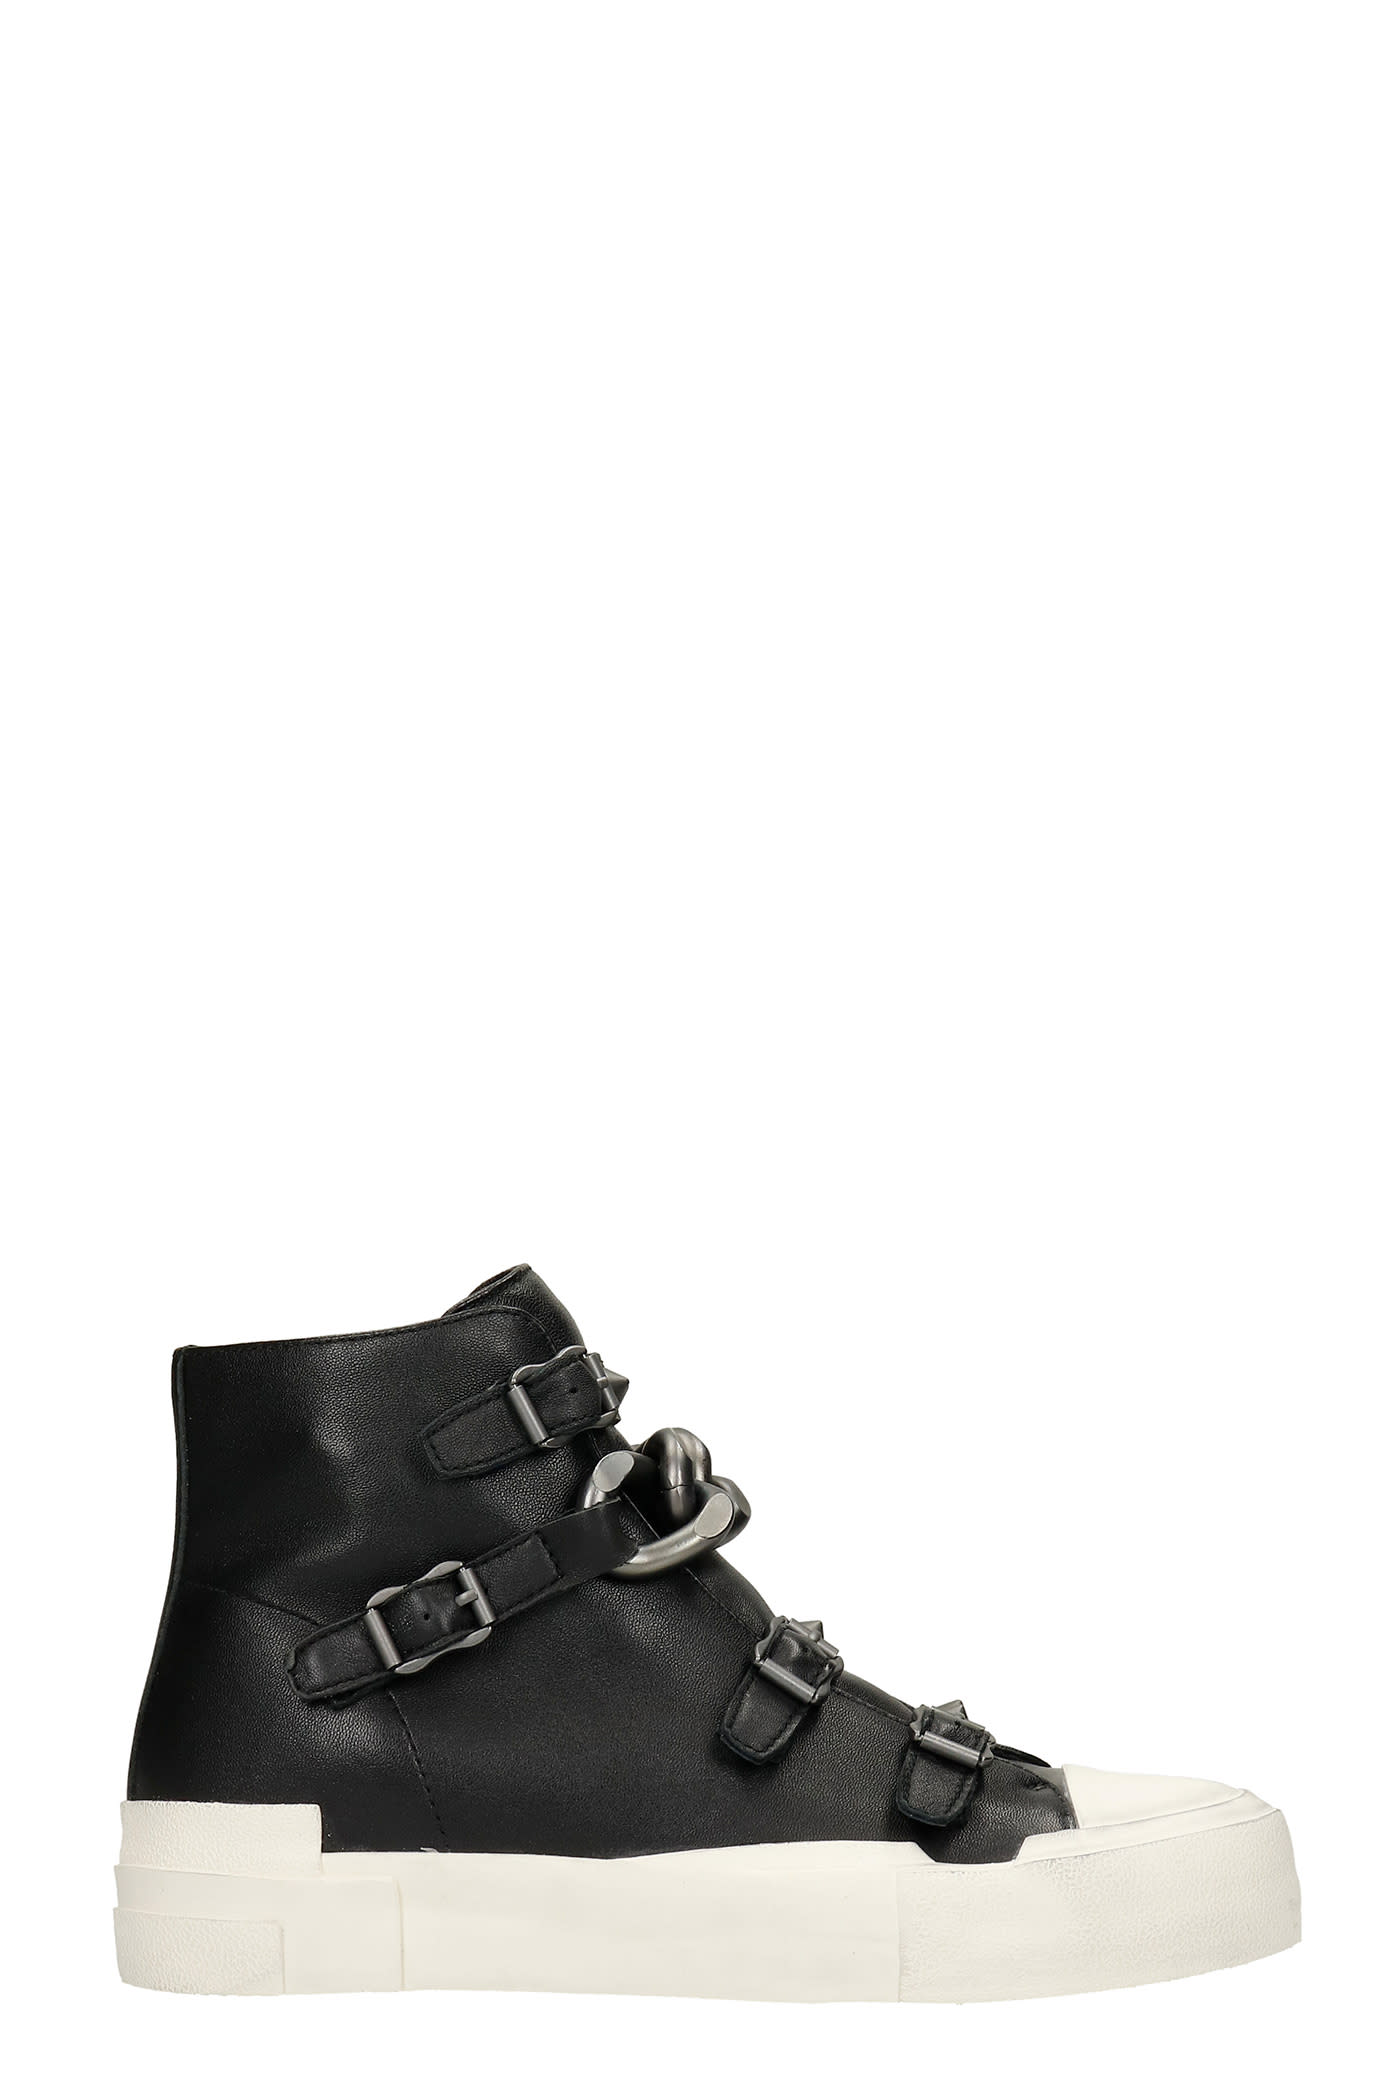 Ash Galaxy Sneakers In Black Leather